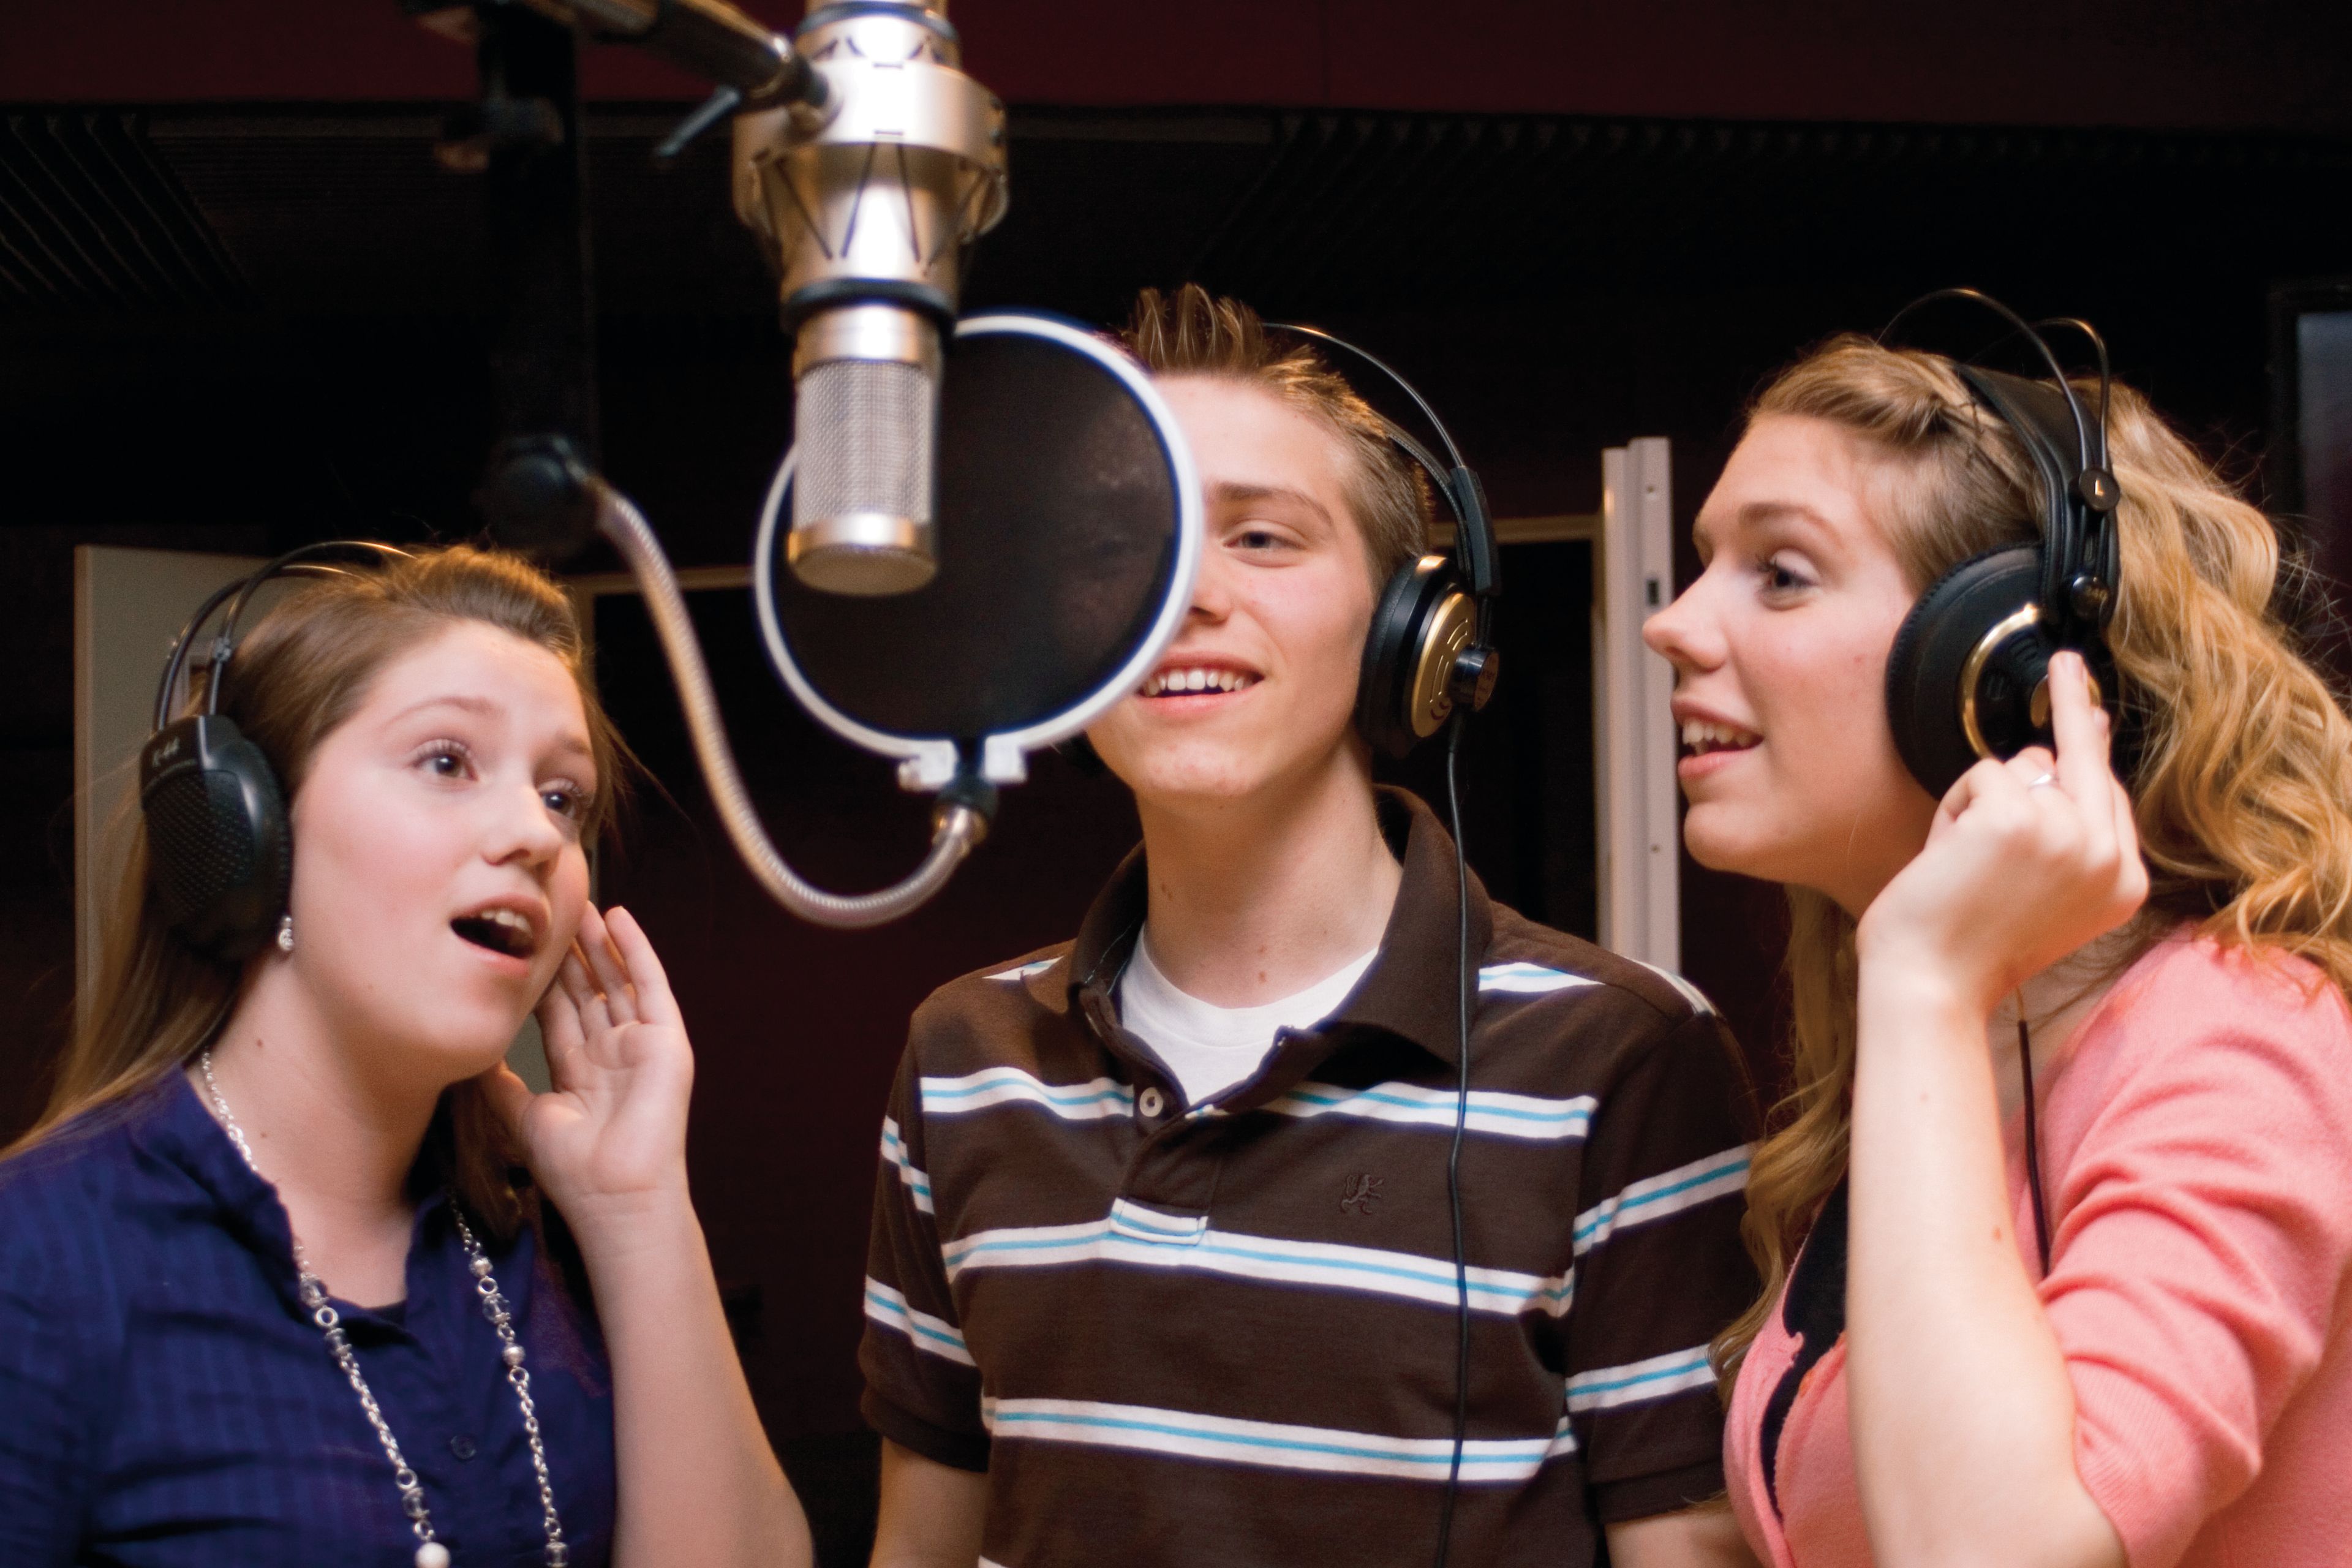 Three youth stand around a microphone together and sing in a recording studio.